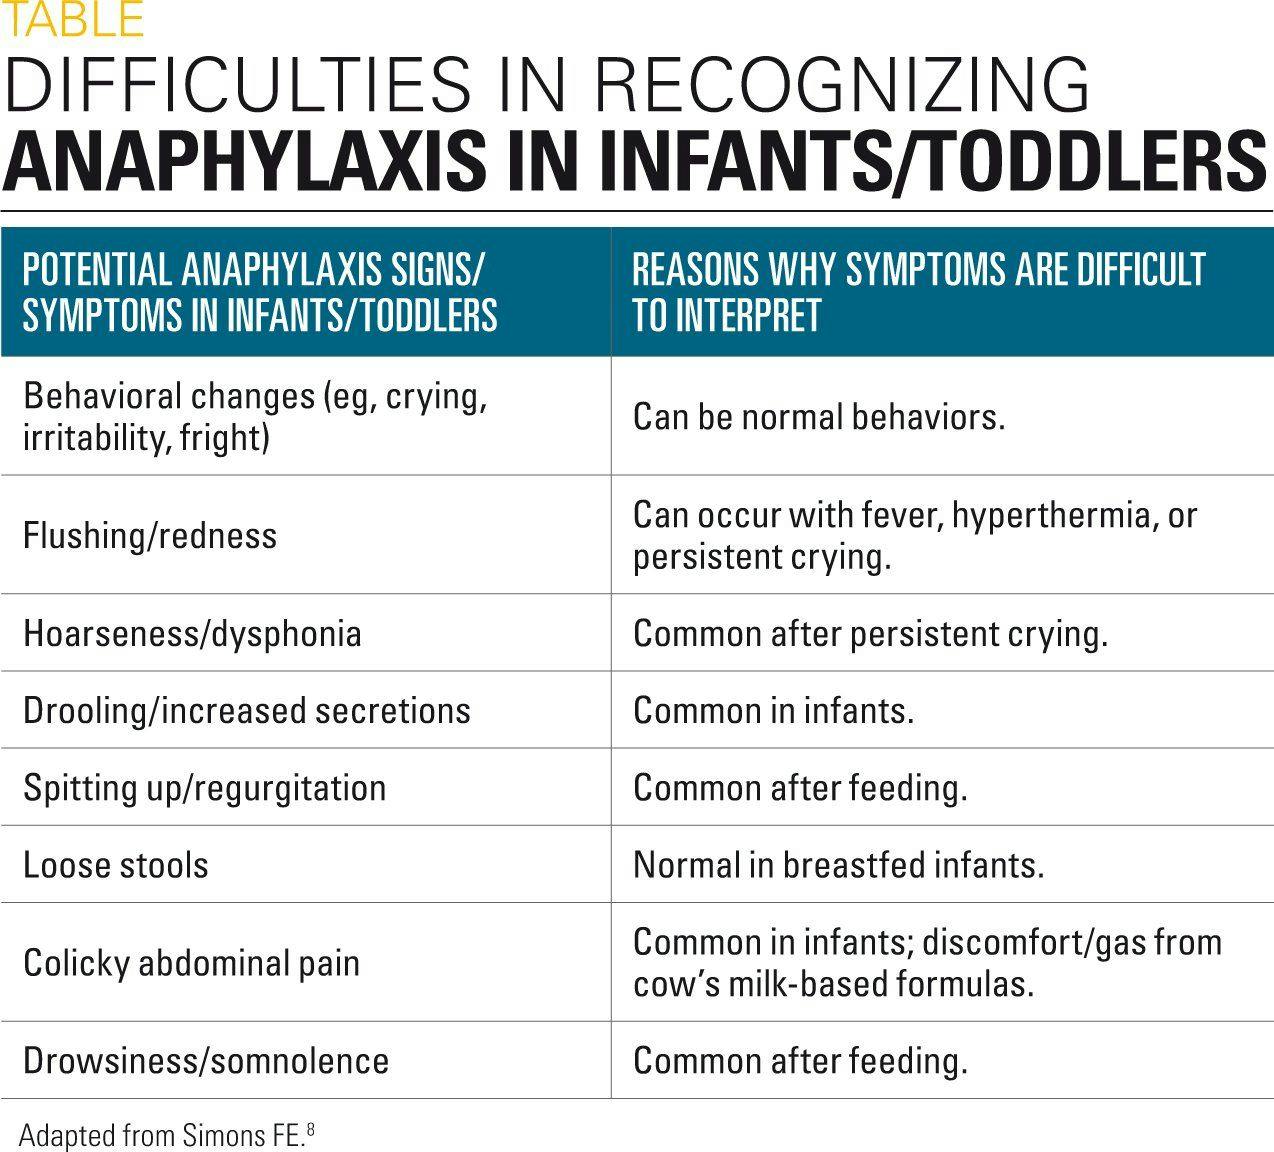 table looking at difficulties recognizing anaphylaxis in infants/toddlers